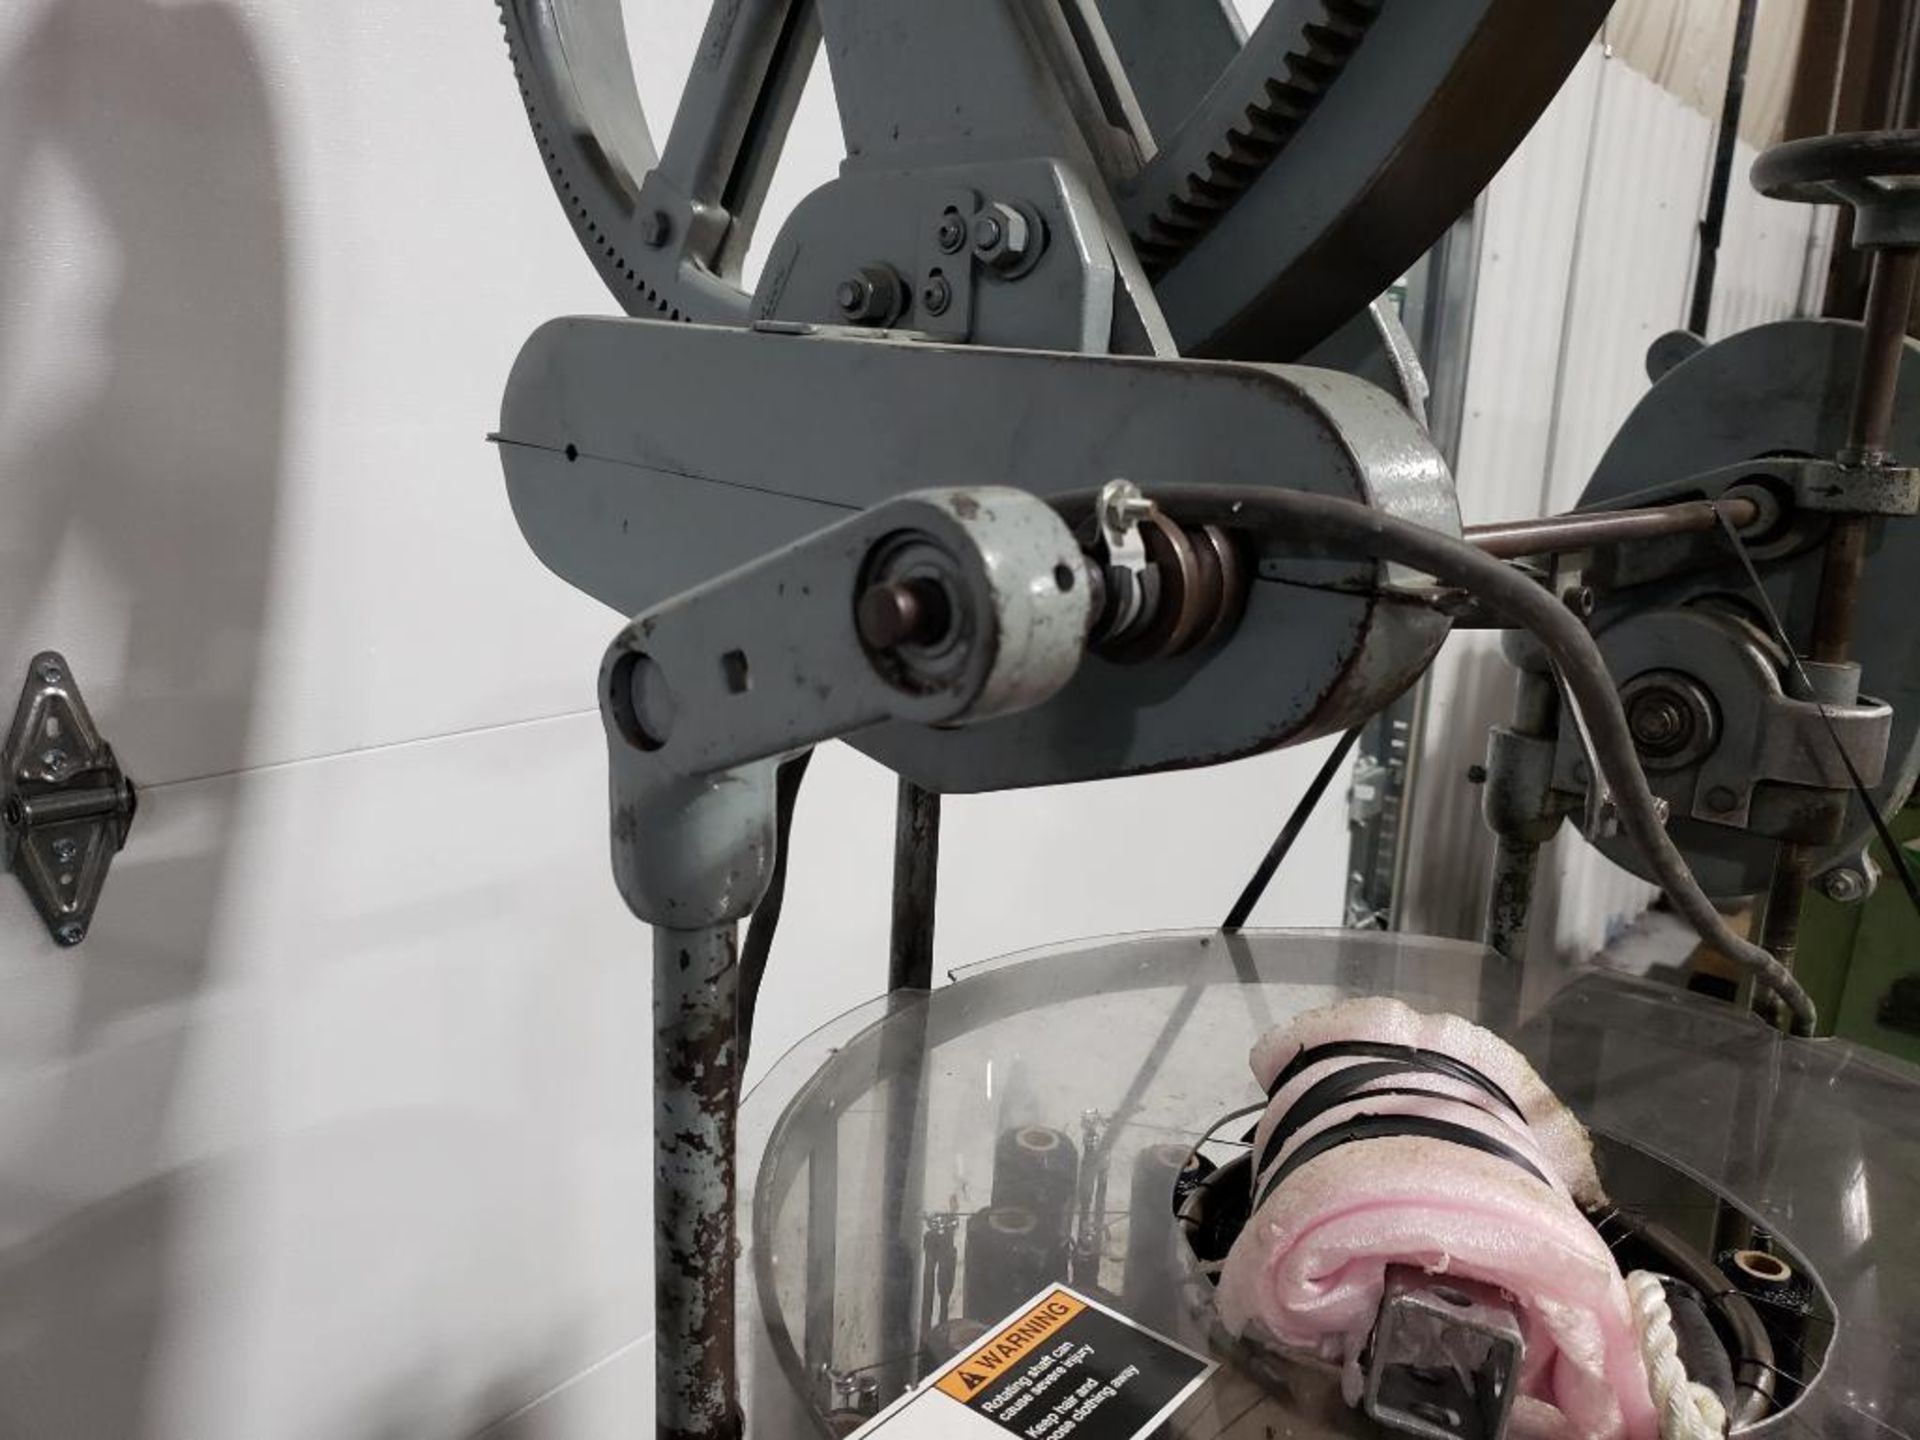 New England Butt vertical wire harness braiding machine. - Image 5 of 27